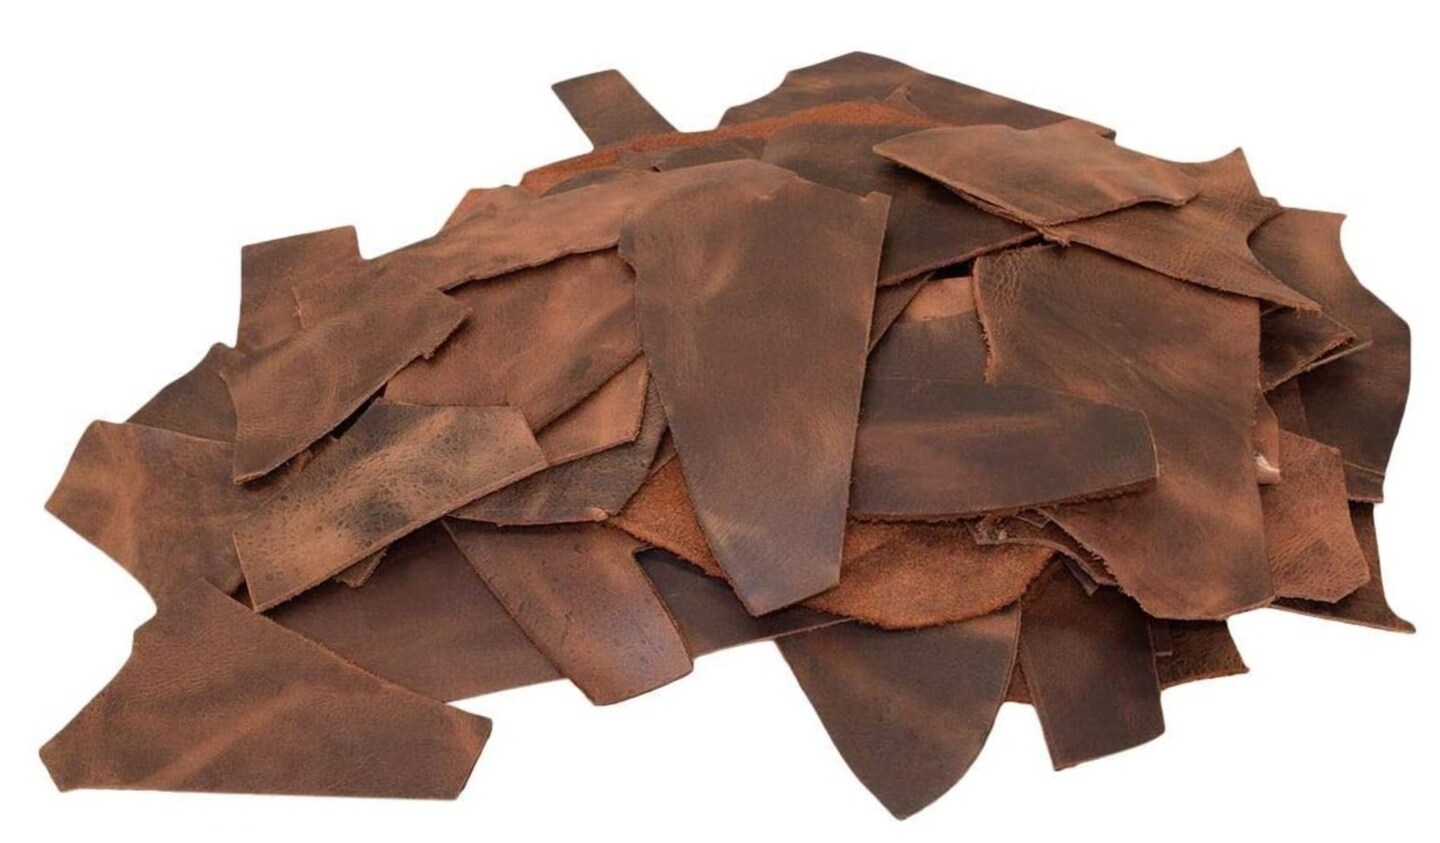 10 LB Scraps Tooling Crafts 100% Cowhide Full Grain Leather 5/6oz (2-2.4mm)  Brown Colors